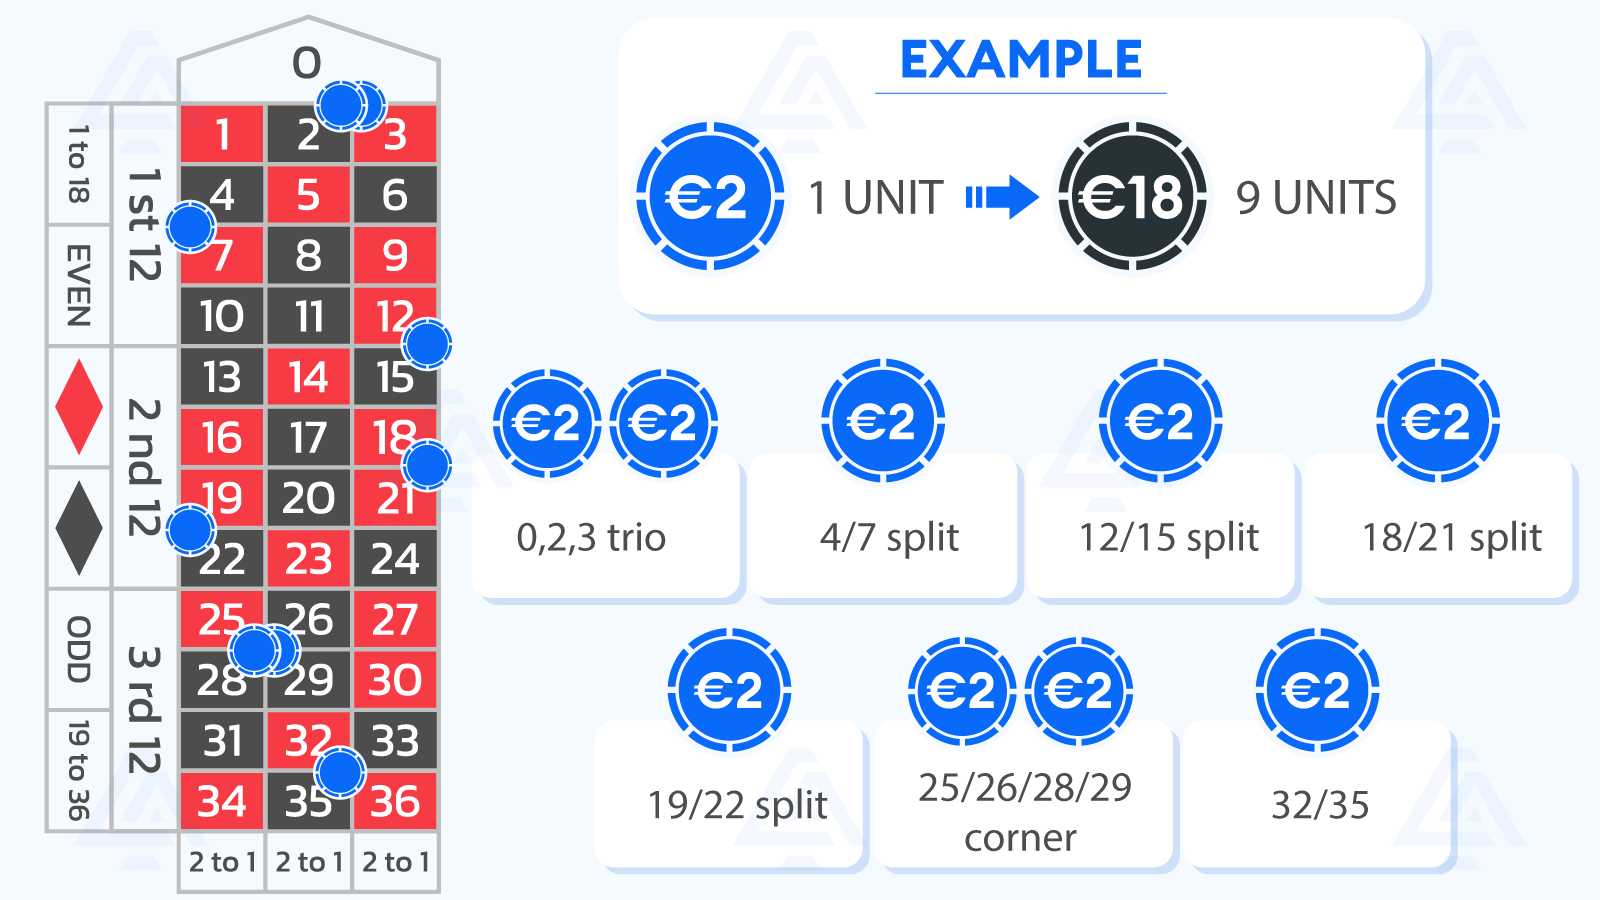 Voisins Roulette betting example